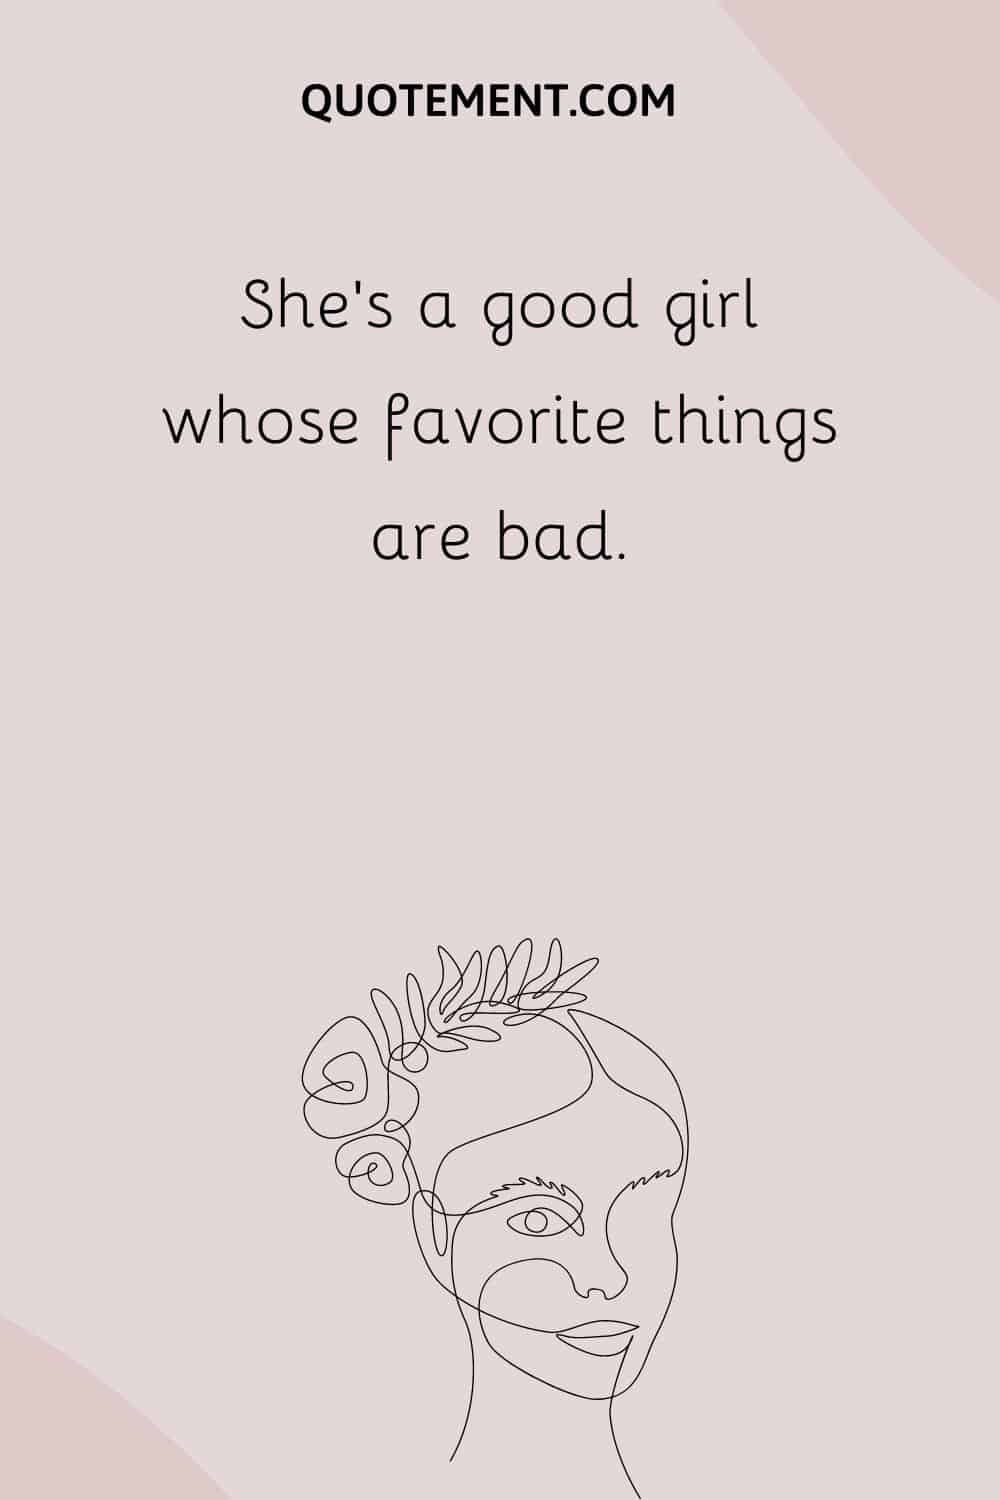 She’s a good girl whose favorite things are bad.